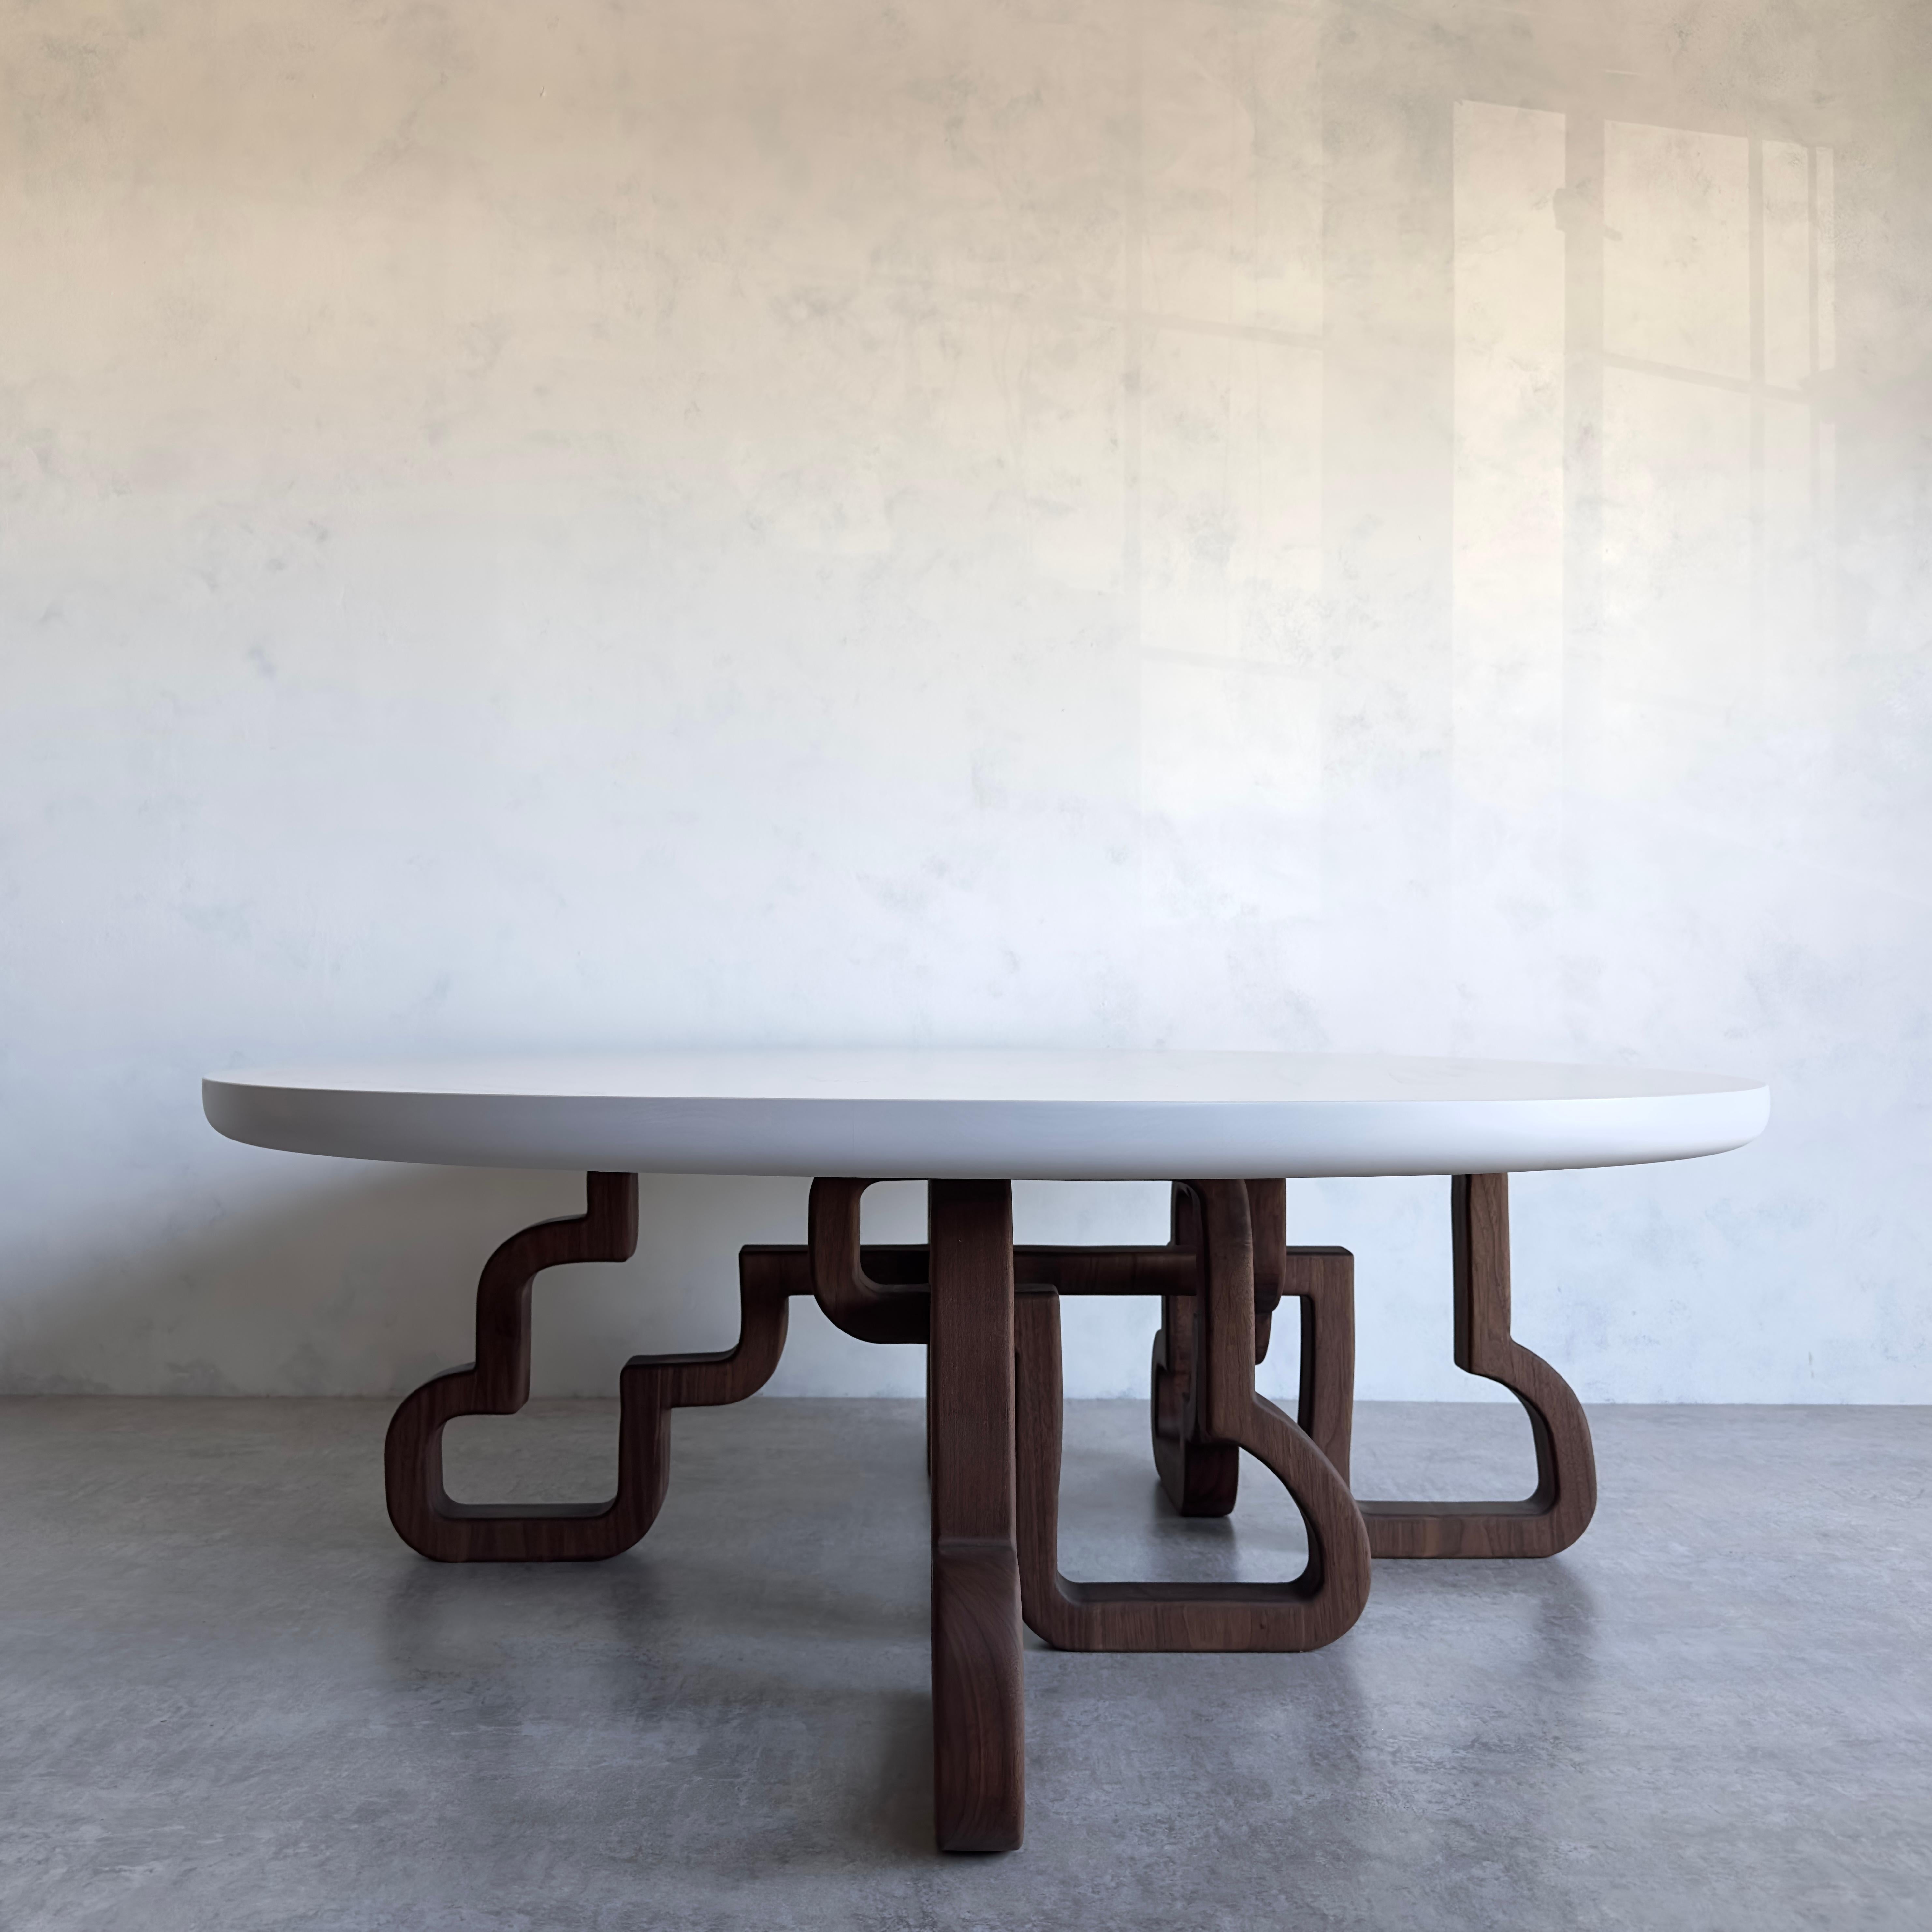 Our Periphery series follows the outline of our designs to create a second table base that utilizes the negative space left by the inner design. The walnut weaves and turns, creating unique forms in the negative space. As this design mimics the